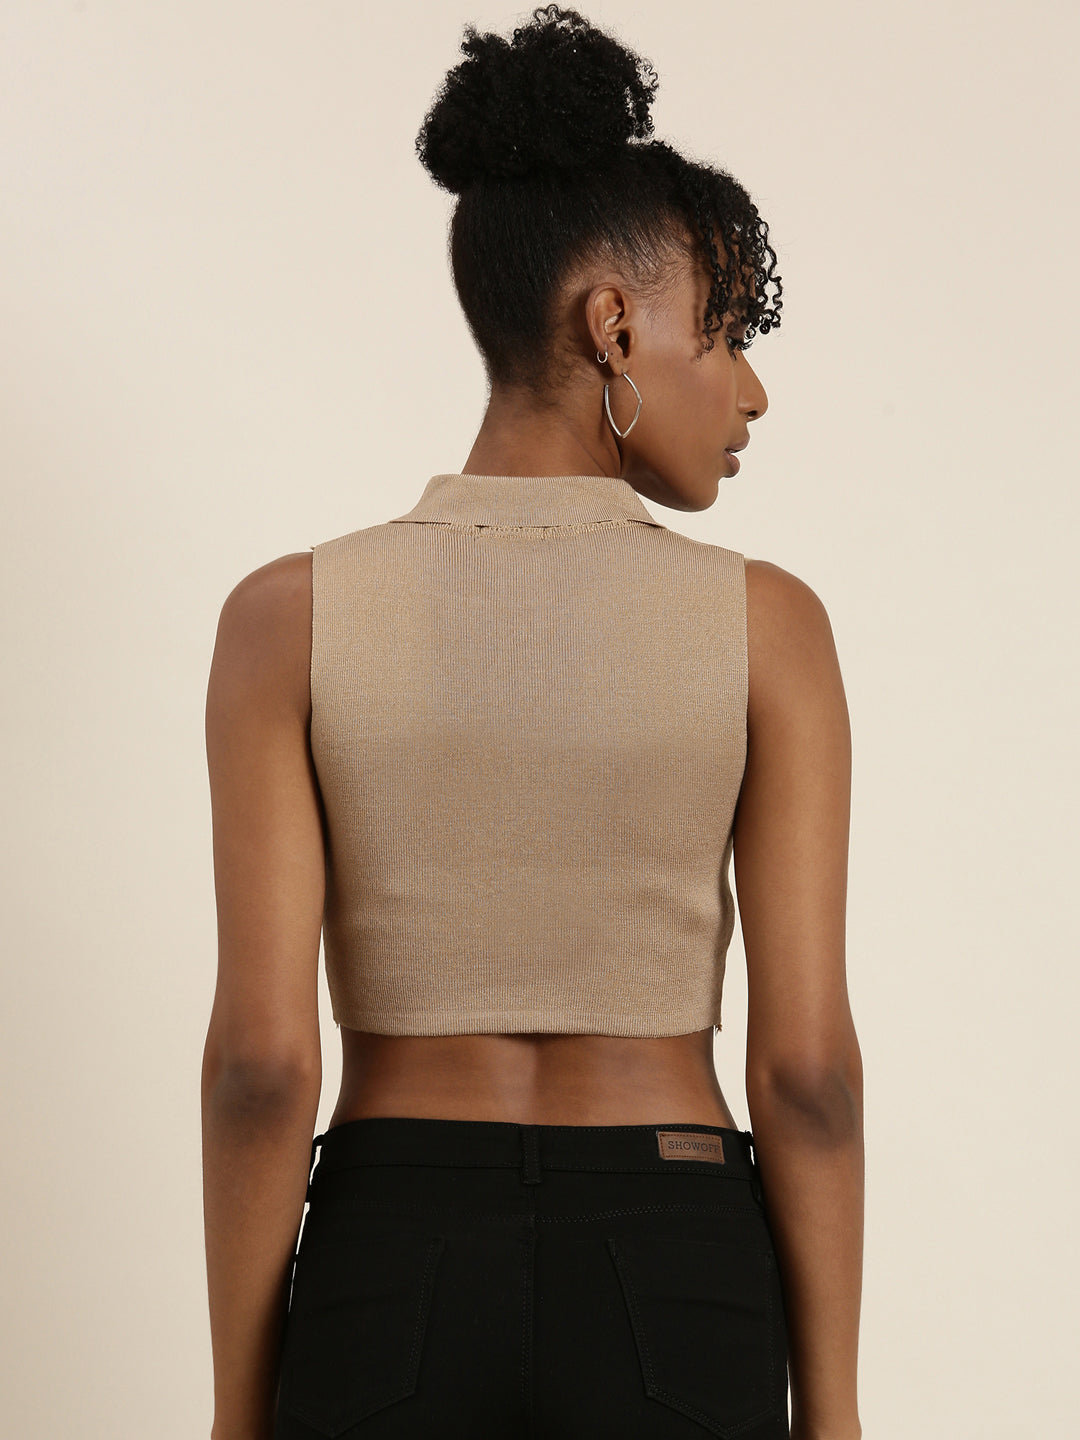 Shirt Collar Solid Sleeveless Fitted Tan Crop Top